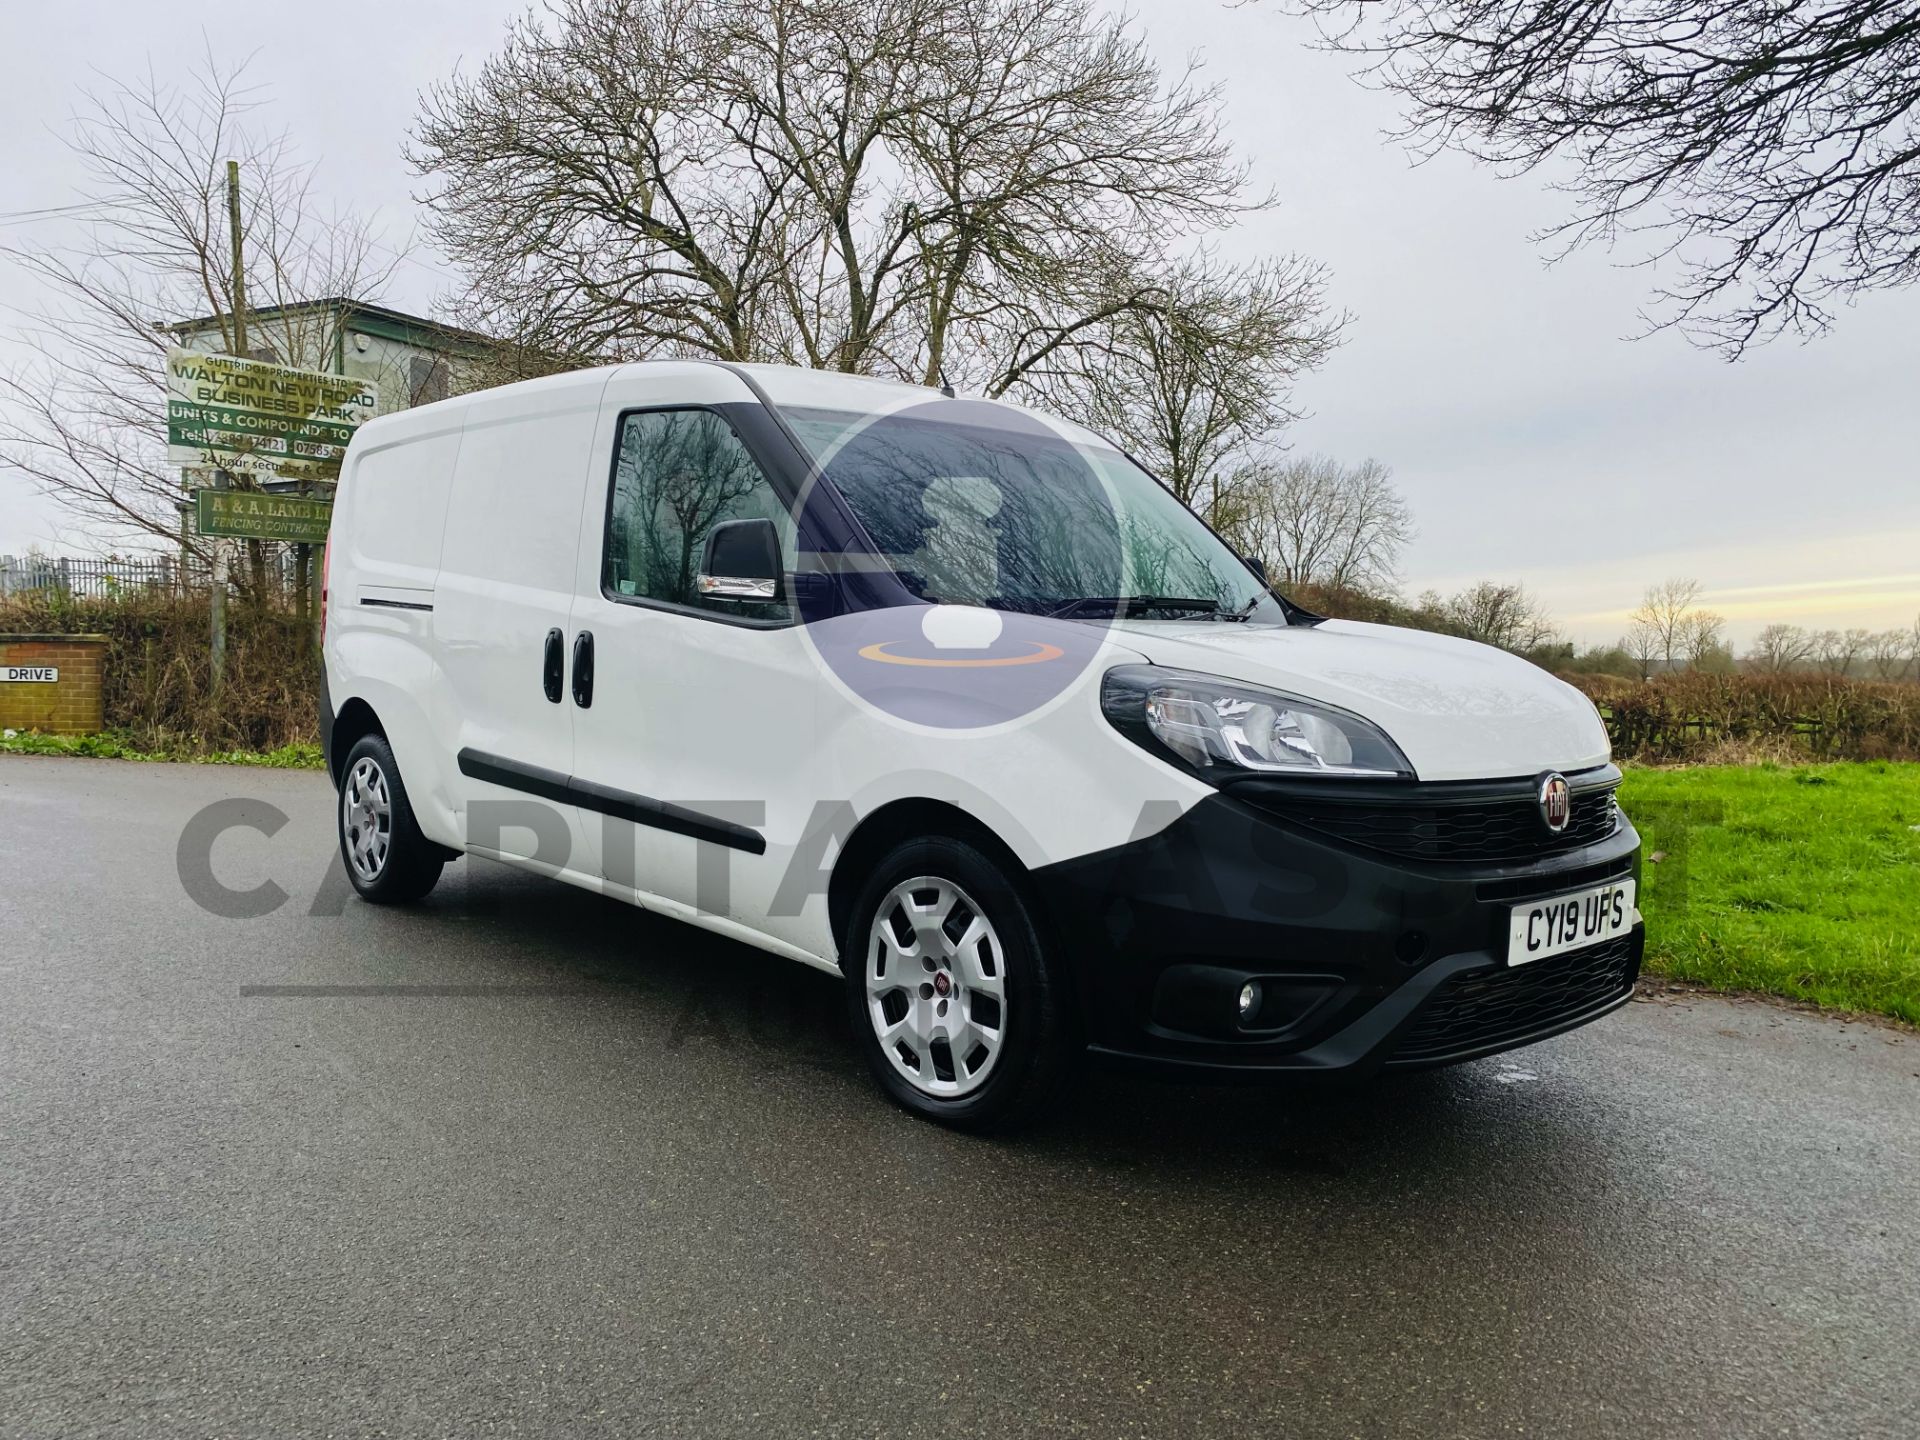 FIAT DOBLO 1.6 MULTIJET LWB "EURO 6" AIR CON - ONLY 46793 MILES! - 19 REG - (NEW SHAPE) - - Image 2 of 23